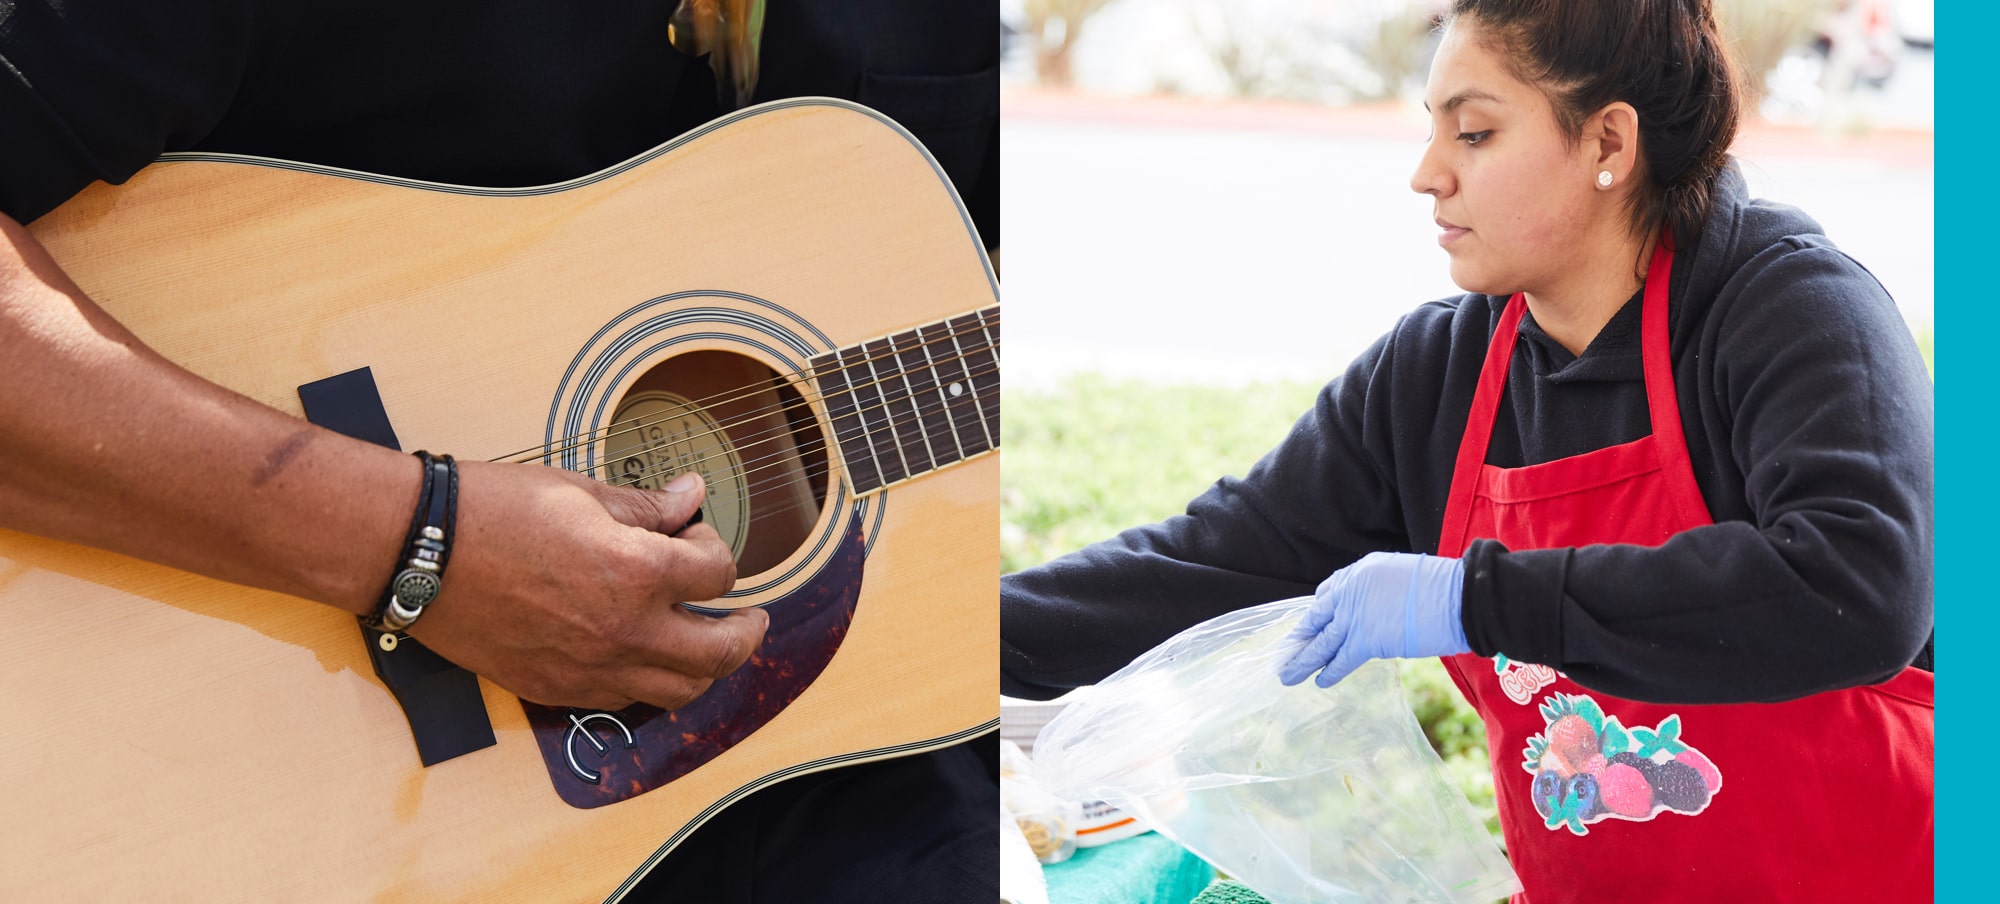 Collage of close up of guitar on left and woman working in farmers market on right